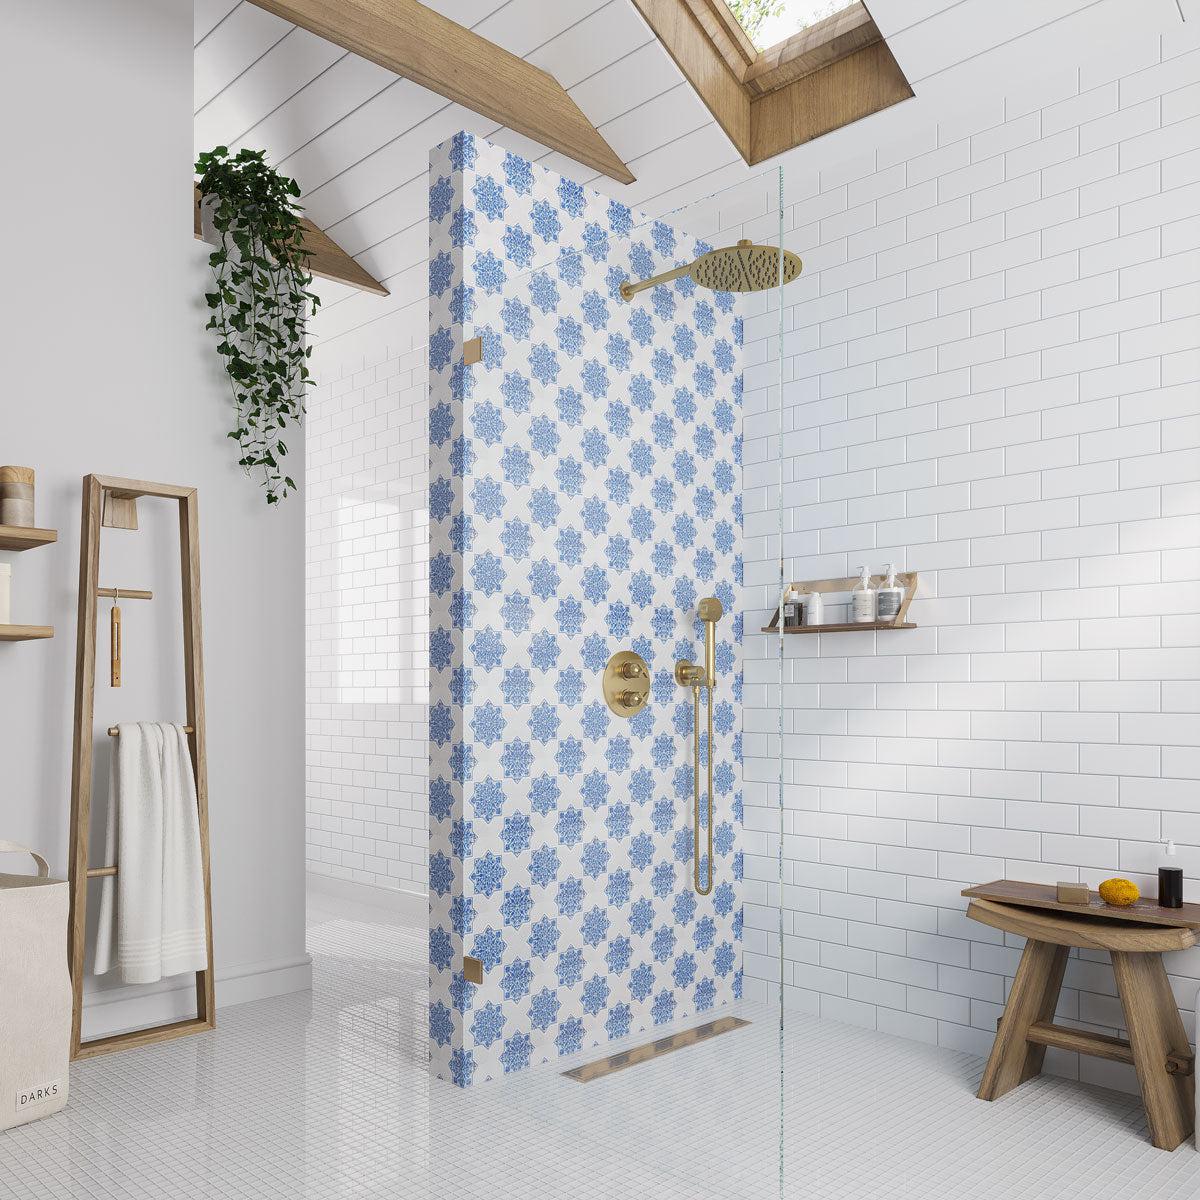 Blue and white patterned shower accent wall